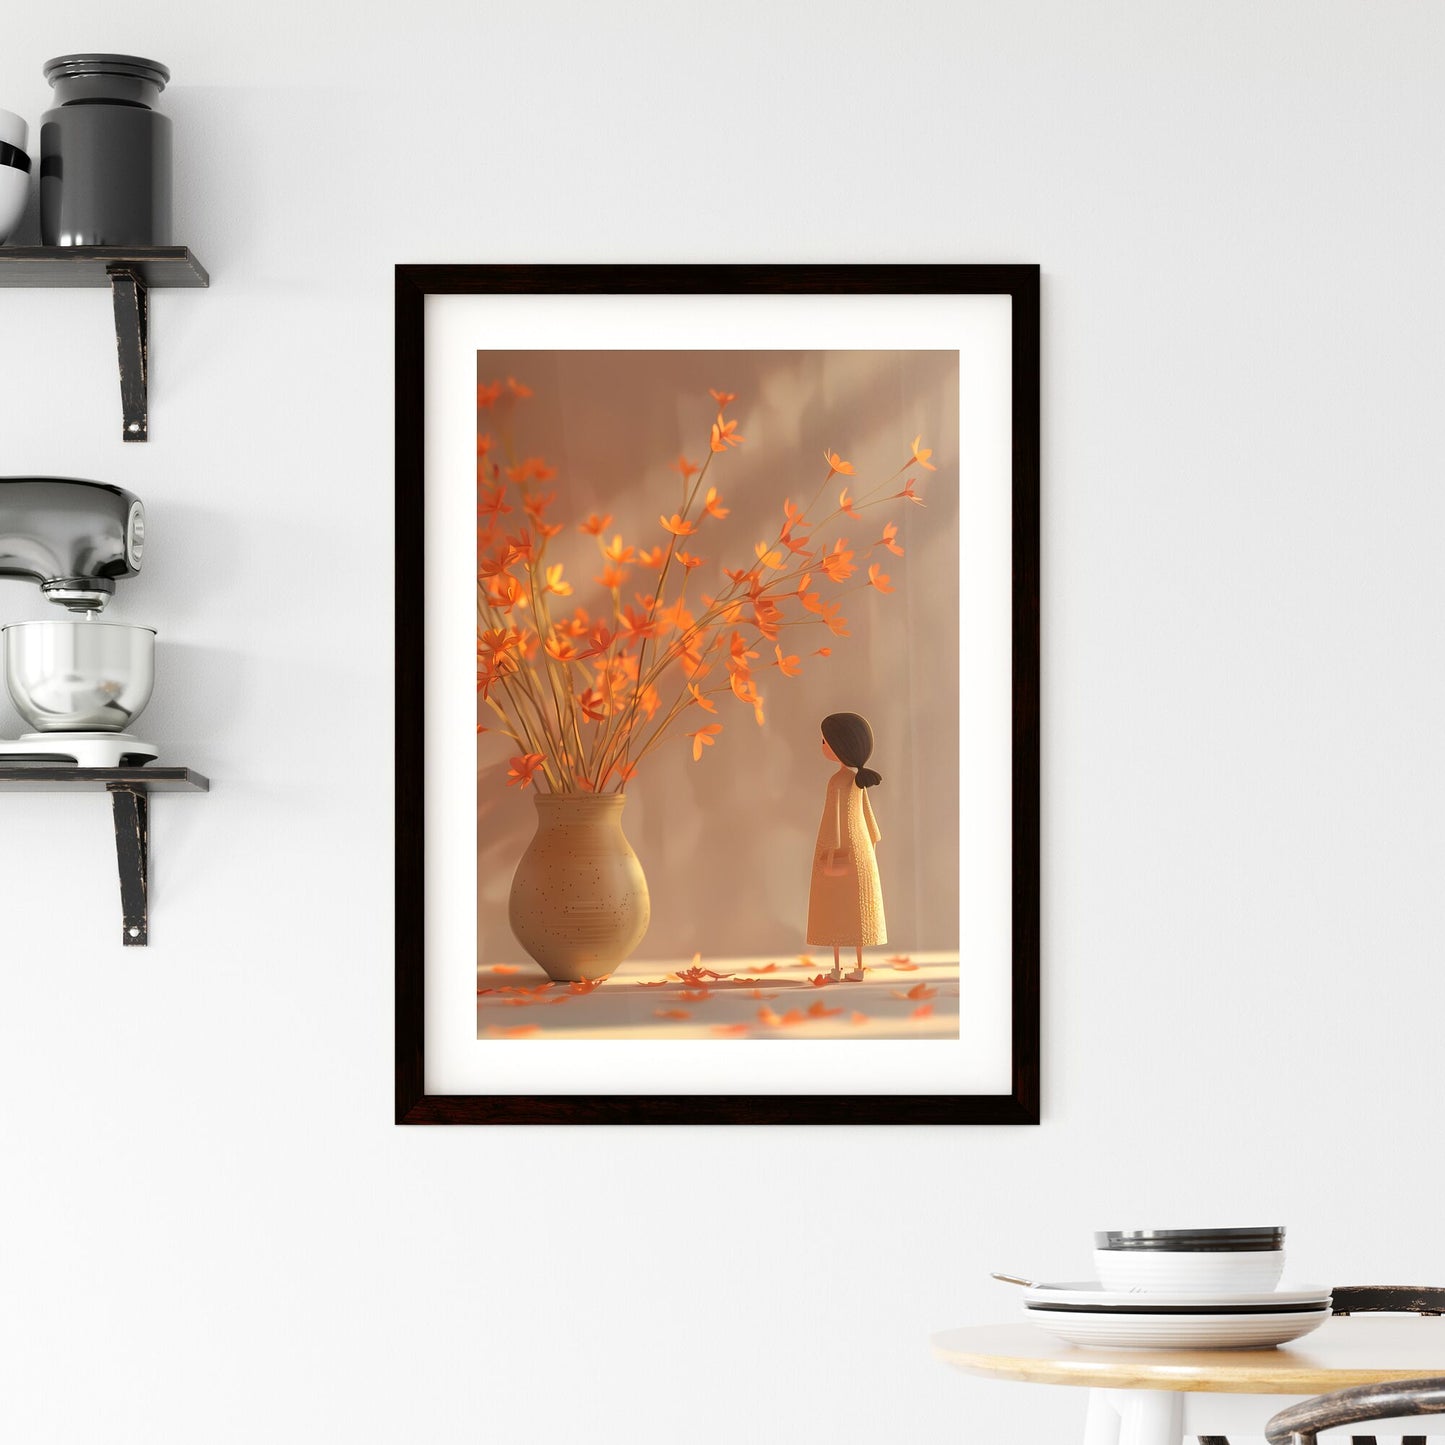 32K UHD minimalist cartoon doll standing next to light orange and pink vase painting with vibrant art focus patty maher lively colorized tableaus Default Title